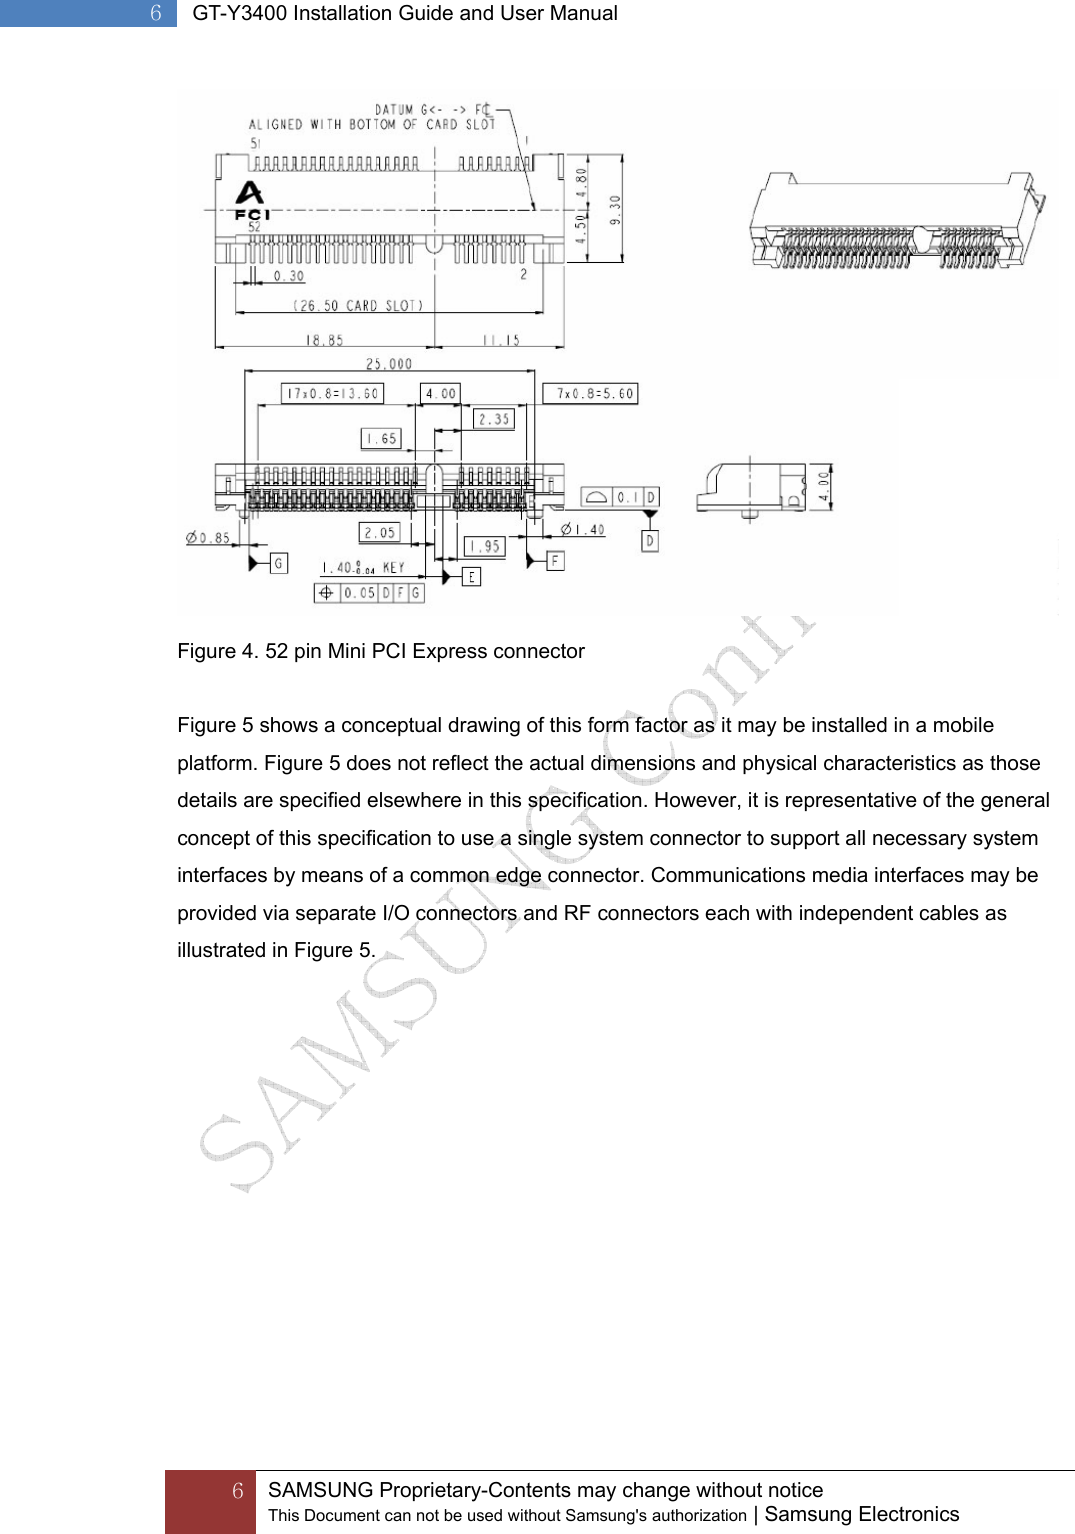  6 SAMSUNG Proprietary-Contents may change without notice This Document can not be used without Samsung&apos;s authorization | Samsung Electronics  6  GT-Y3400 Installation Guide and User Manual  Figure 4. 52 pin Mini PCI Express connector  Figure 5 shows a conceptual drawing of this form factor as it may be installed in a mobile platform. Figure 5 does not reflect the actual dimensions and physical characteristics as those details are specified elsewhere in this specification. However, it is representative of the general concept of this specification to use a single system connector to support all necessary system interfaces by means of a common edge connector. Communications media interfaces may be provided via separate I/O connectors and RF connectors each with independent cables as illustrated in Figure 5. 